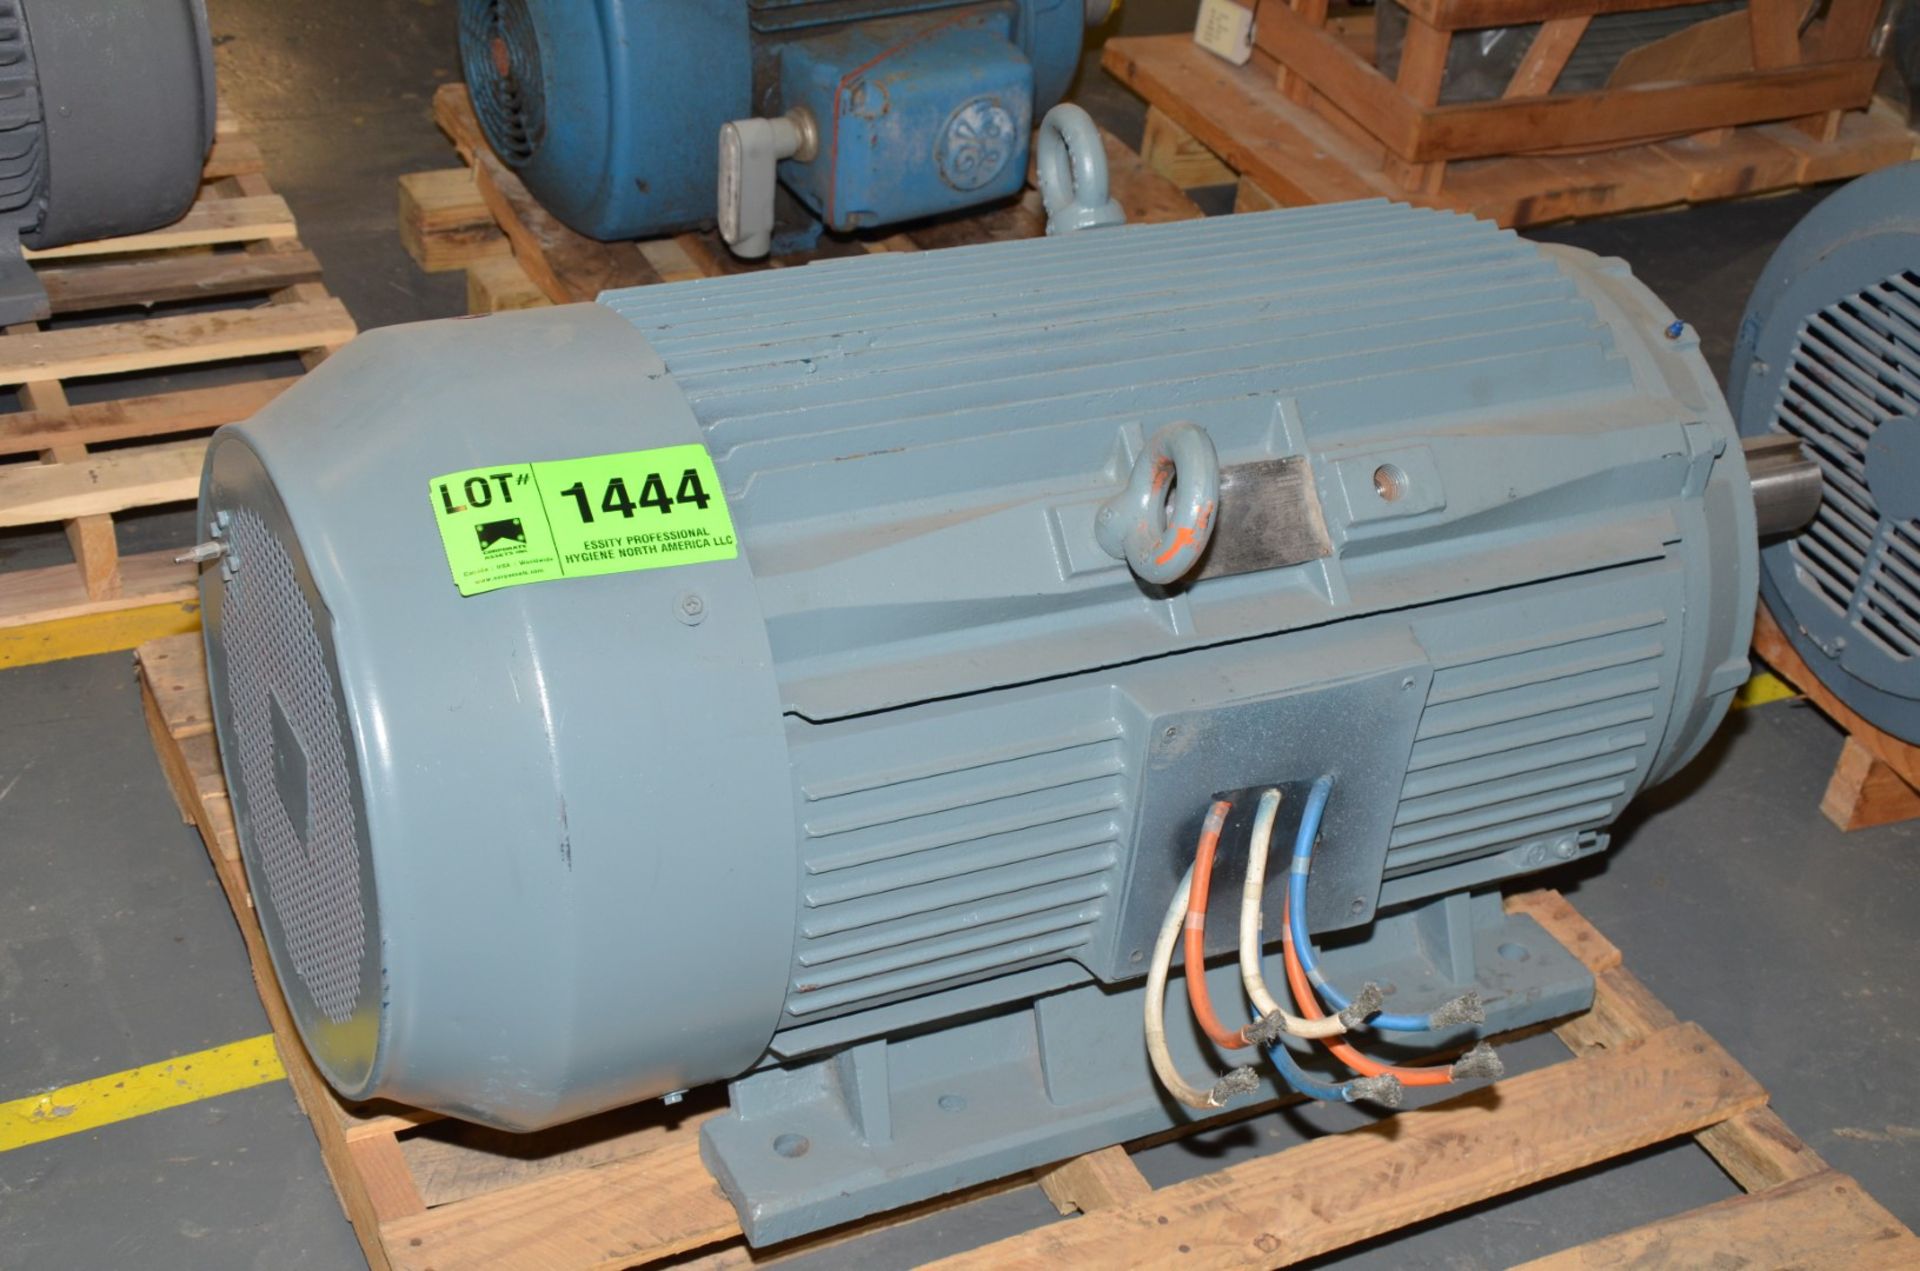 SIEMENS ELECTRIC MOTOR [RIGGING FEE FOR LOT #1444 - $50 USD PLUS APPLICABLE TAXES] - Image 2 of 3